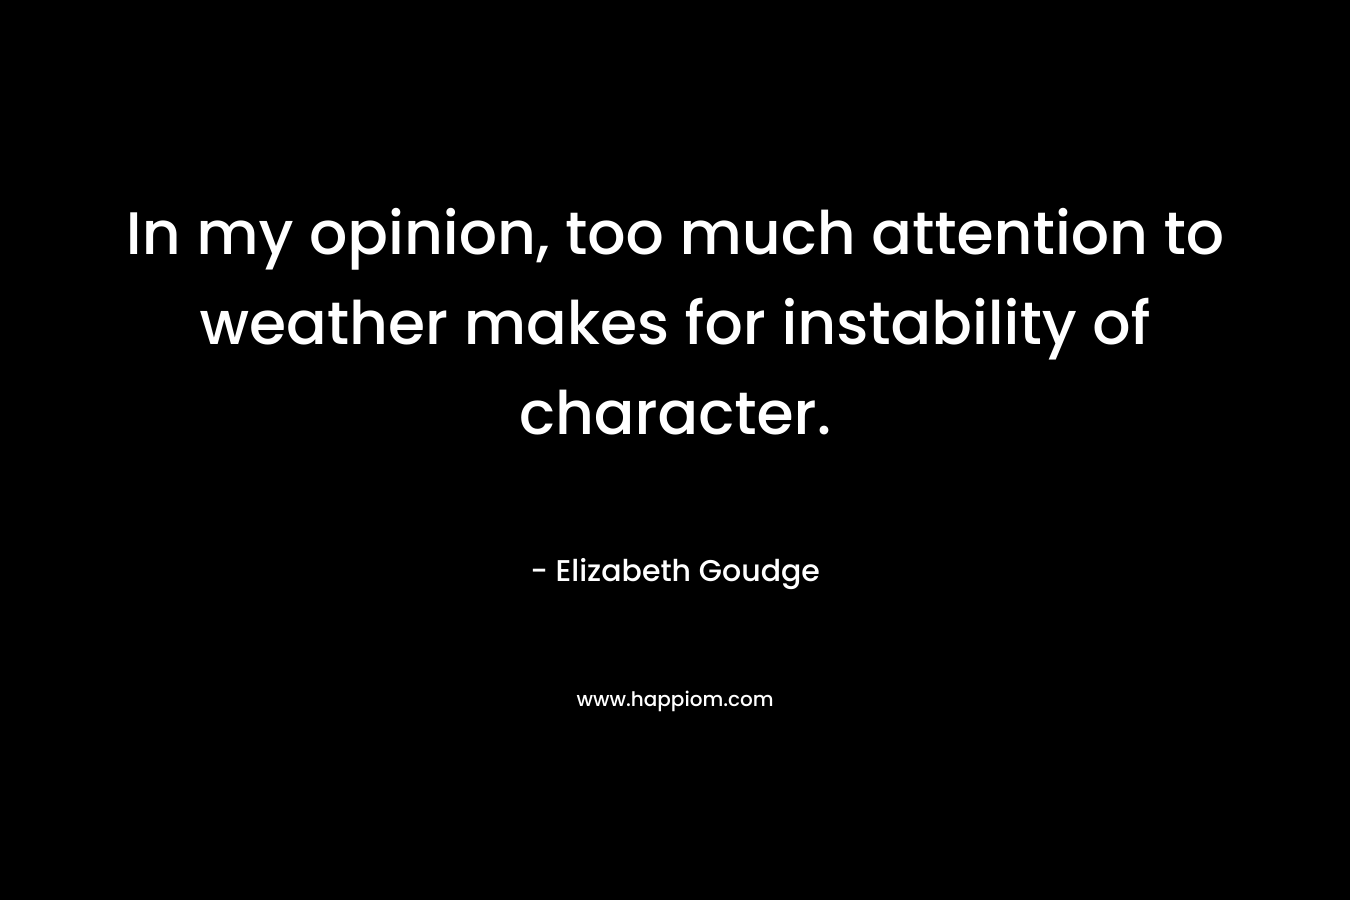 In my opinion, too much attention to weather makes for instability of character.